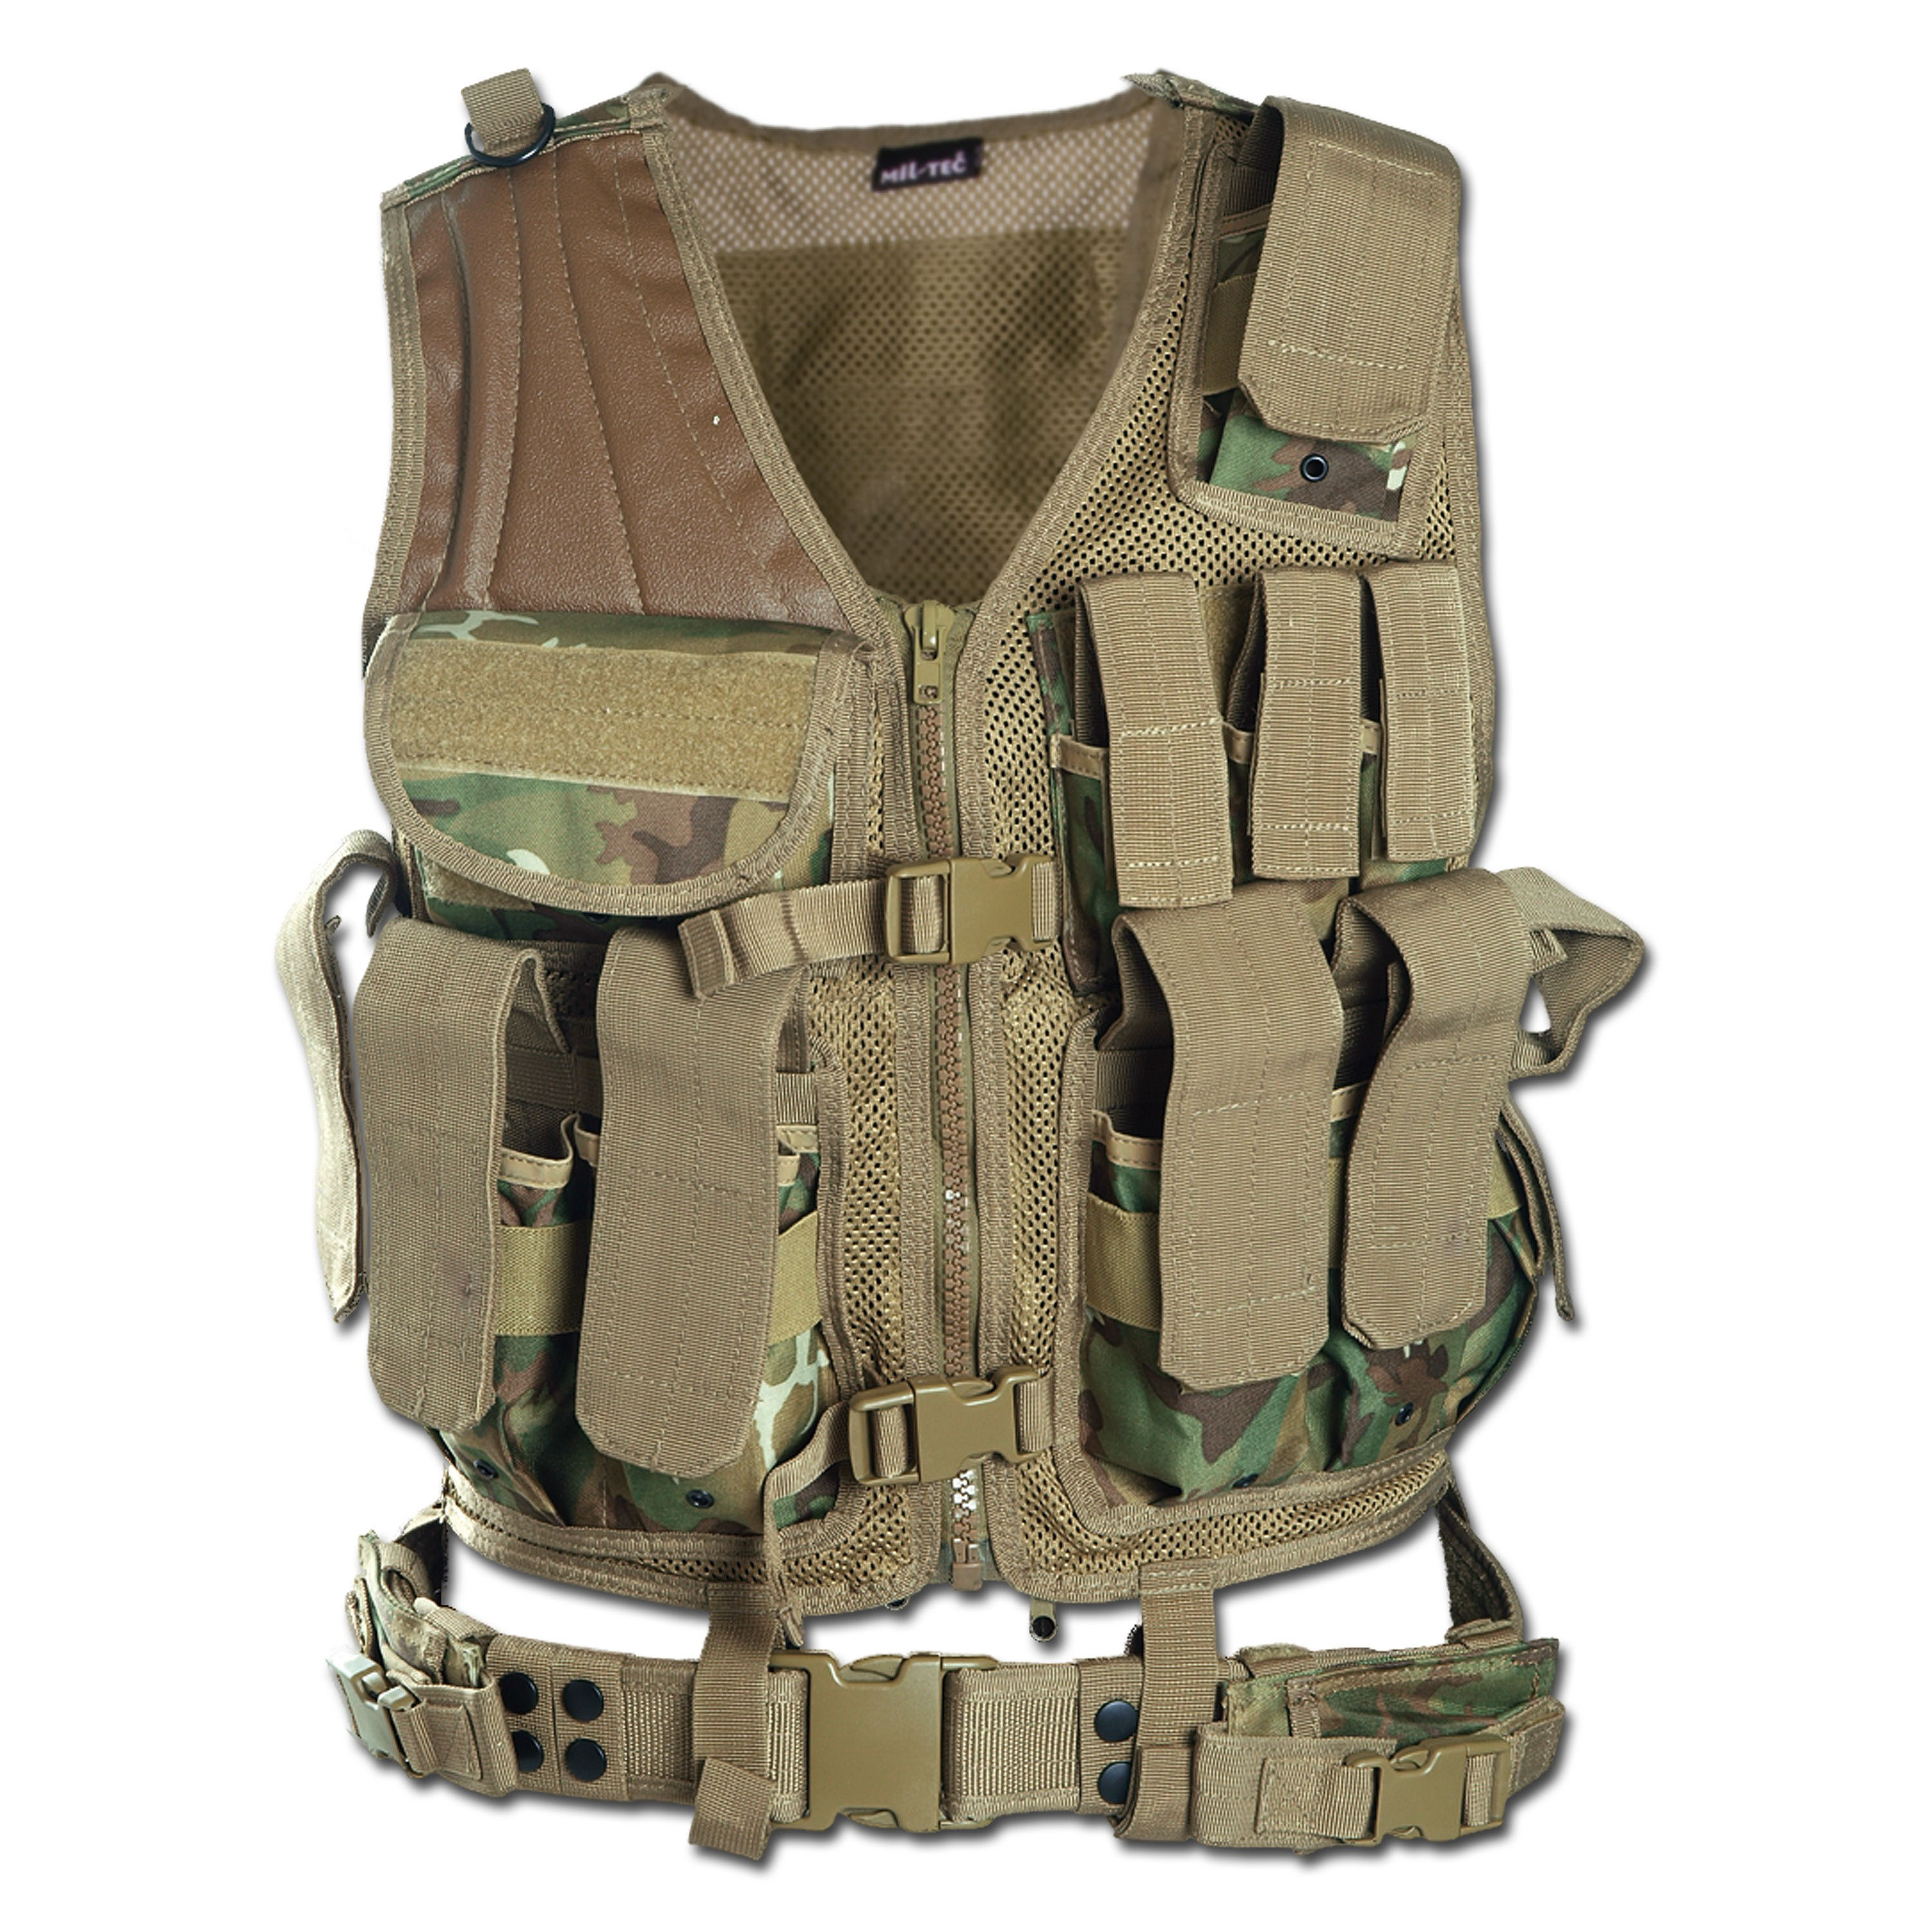 Laser Cut Tactical Vest Olive MOLLE Webbing Rig Combat Airsoft Army New